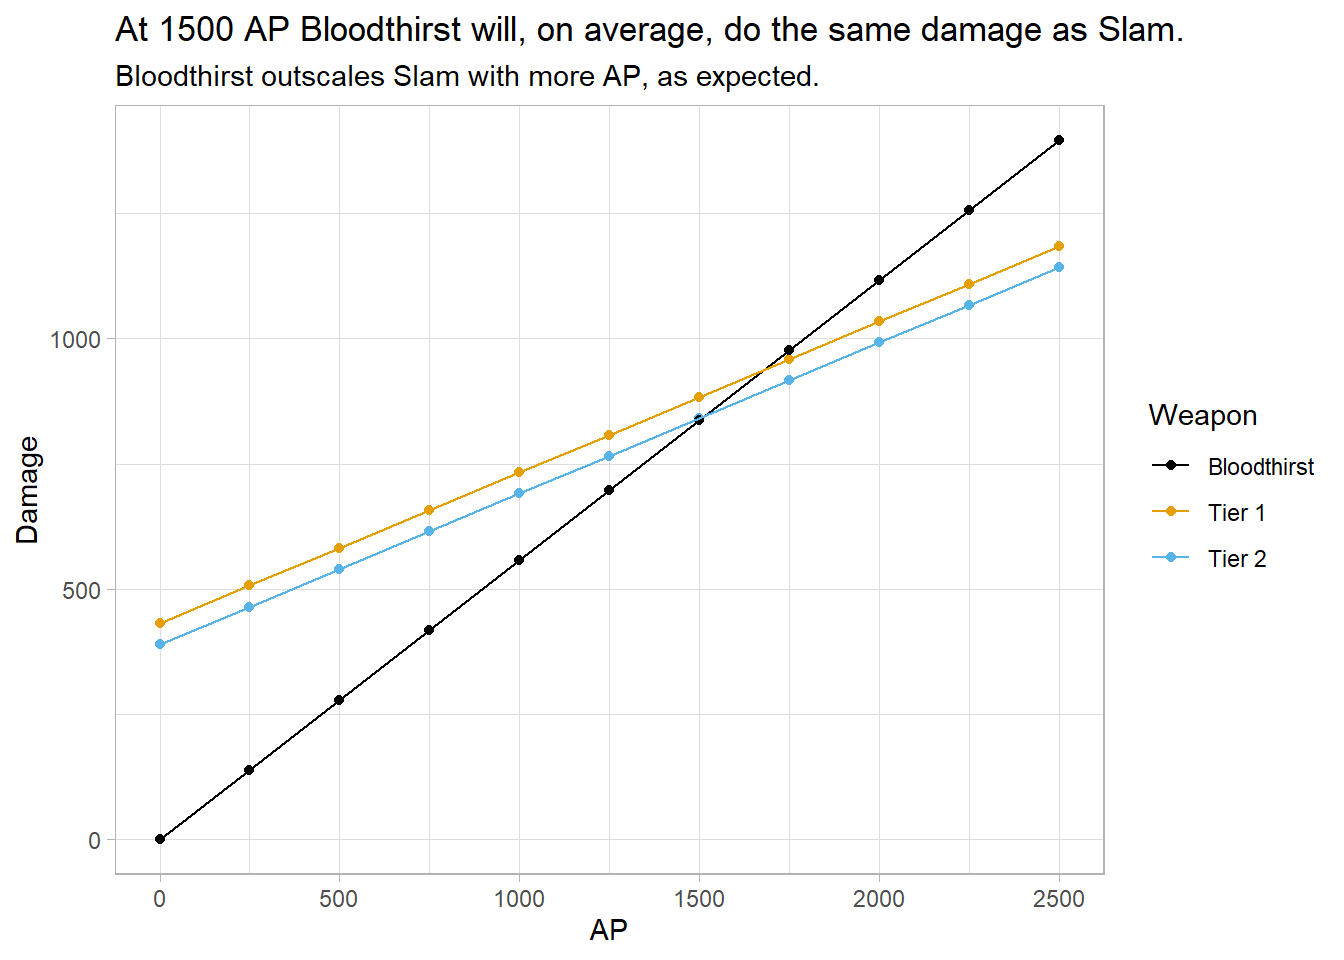 Comparison between Bloodthirst and Slam damage with two different tiers of weapons.